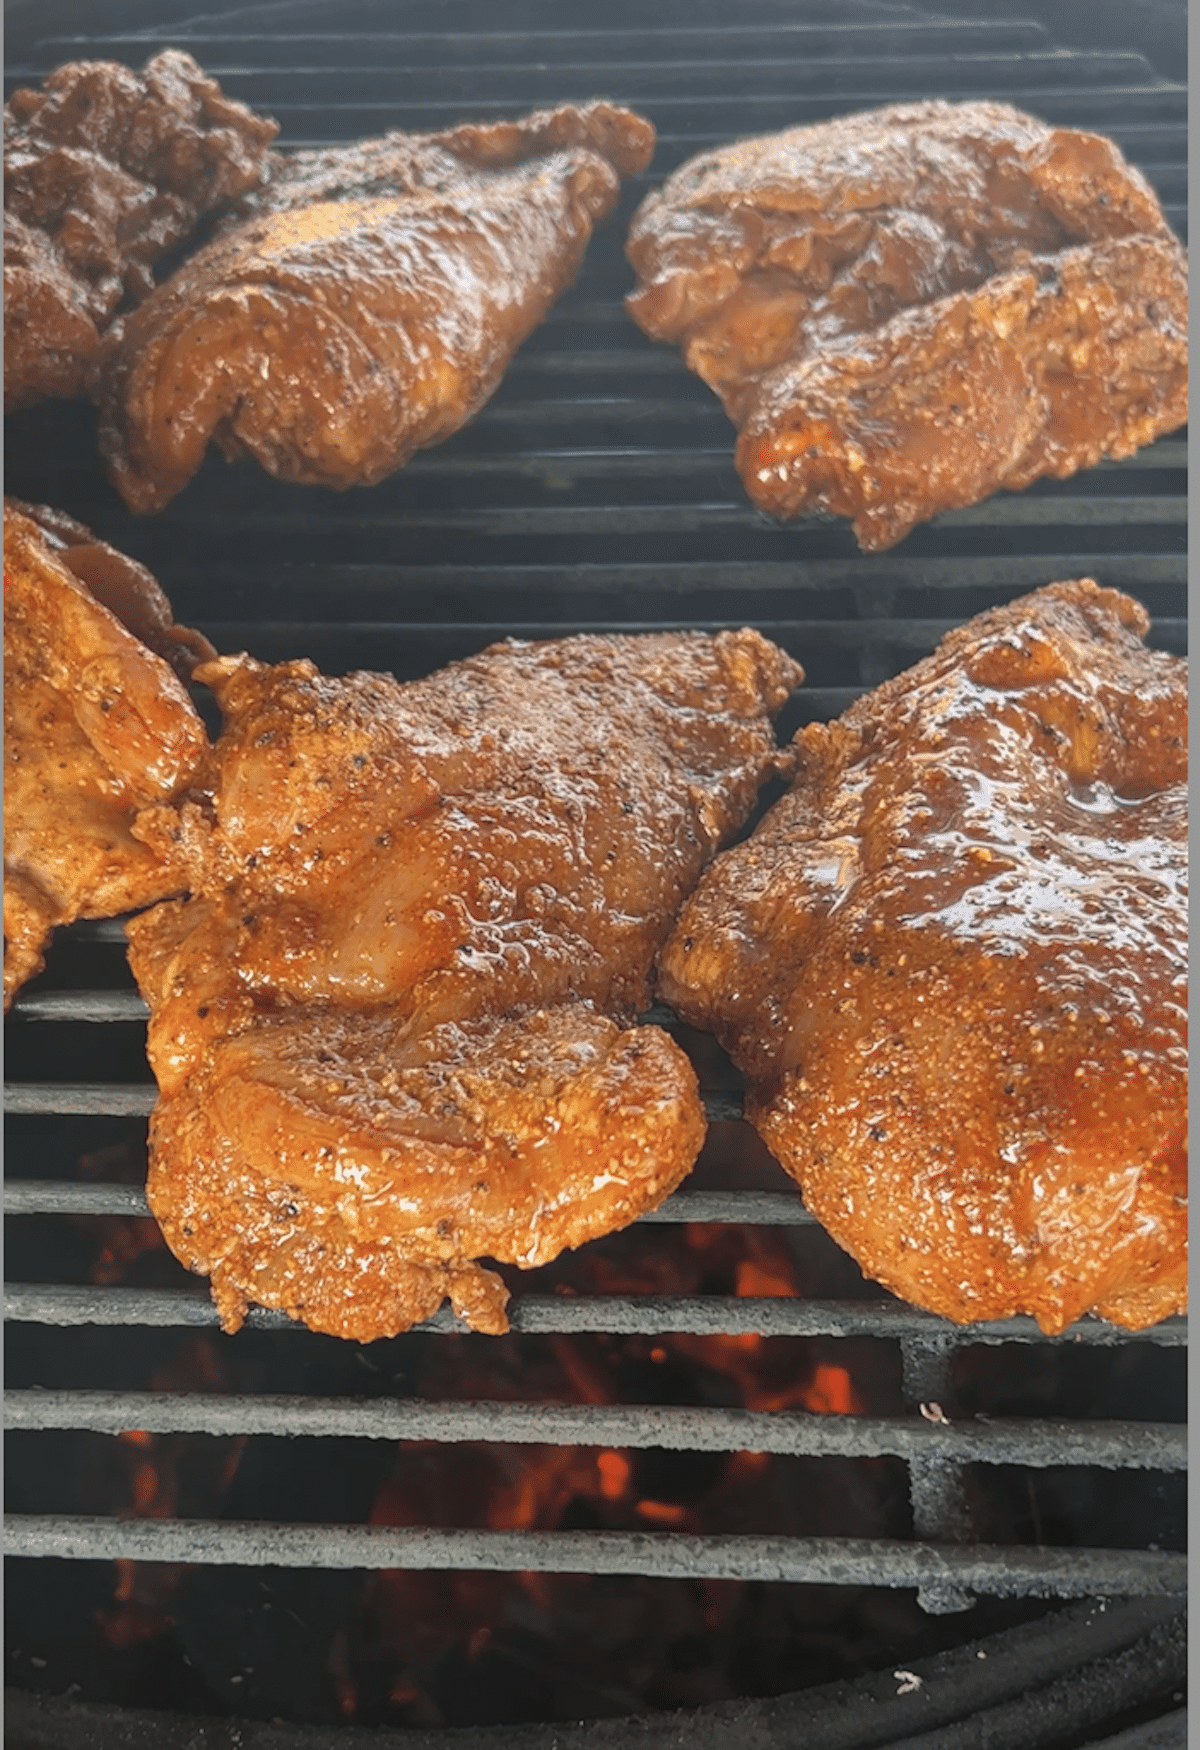 Grilling chicken thighs with shawarma marinade.